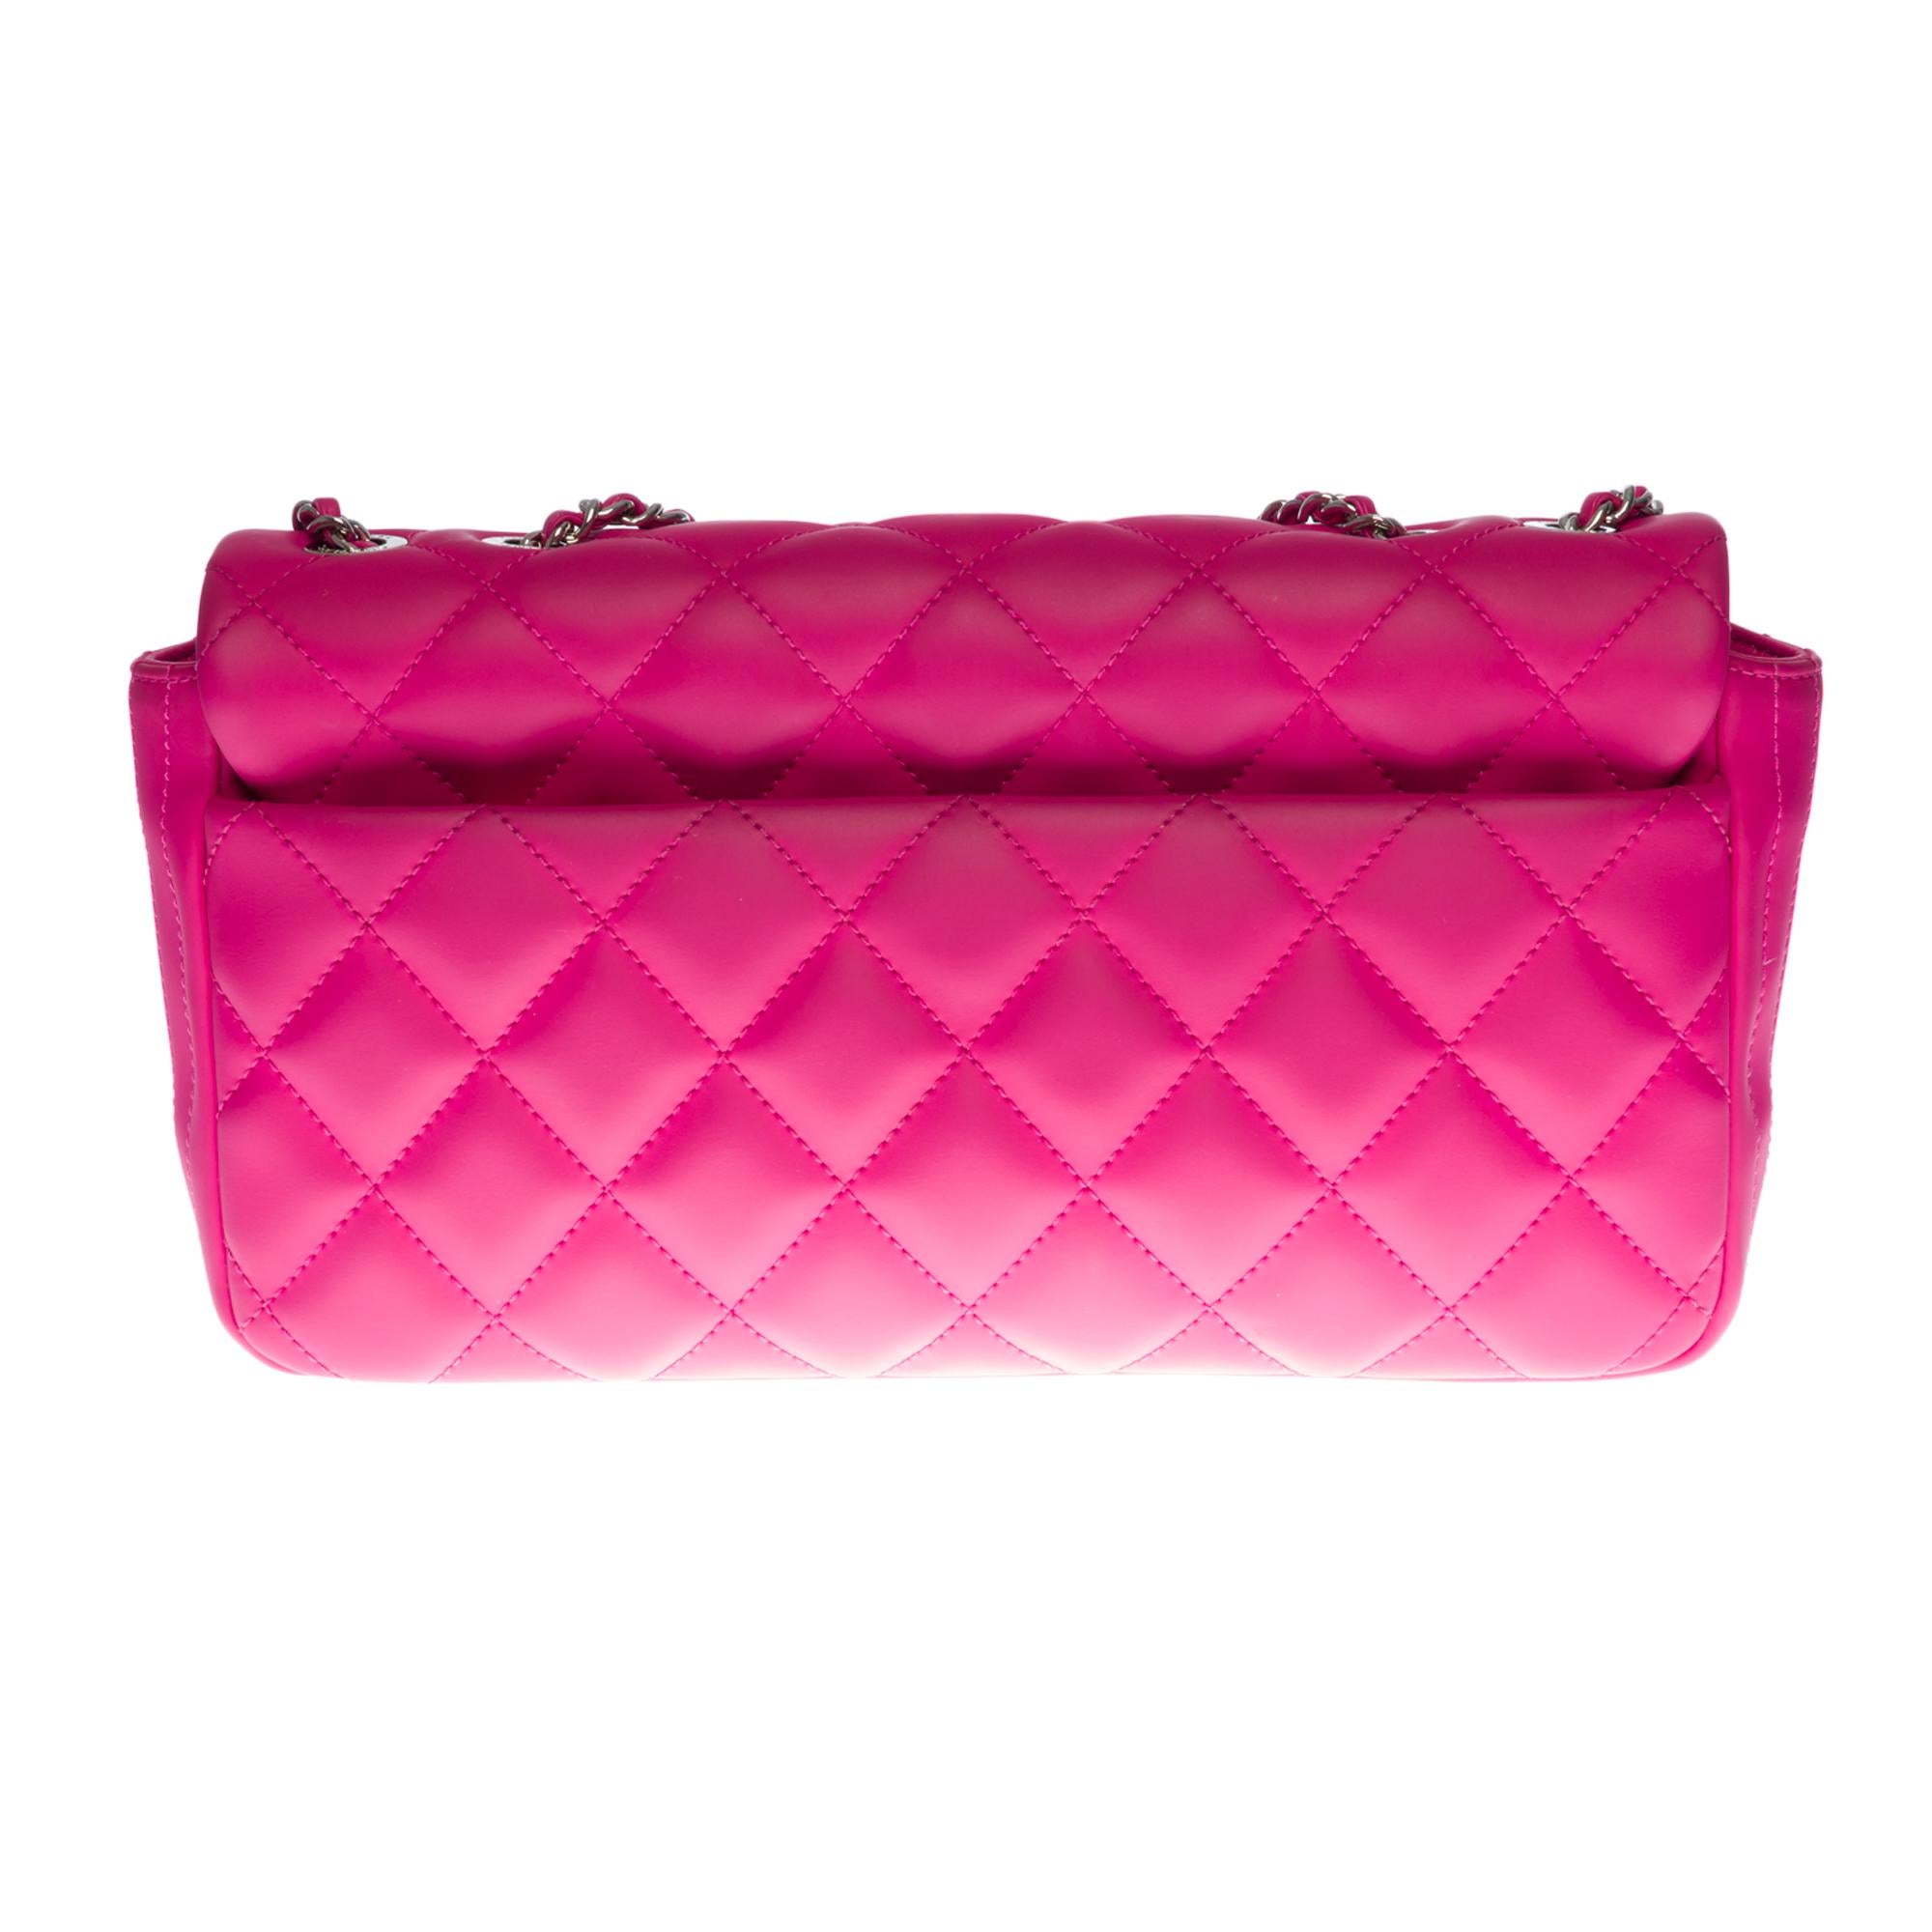 Very contemporary and trendy Chanel Timeless/Classique shoulder bag with simple flap in vegetal leather quilted hot pink, silver metal hardware, a silver metal chain handle intertwined with pink leather allowing a shoulder or shoulder strap
Silver